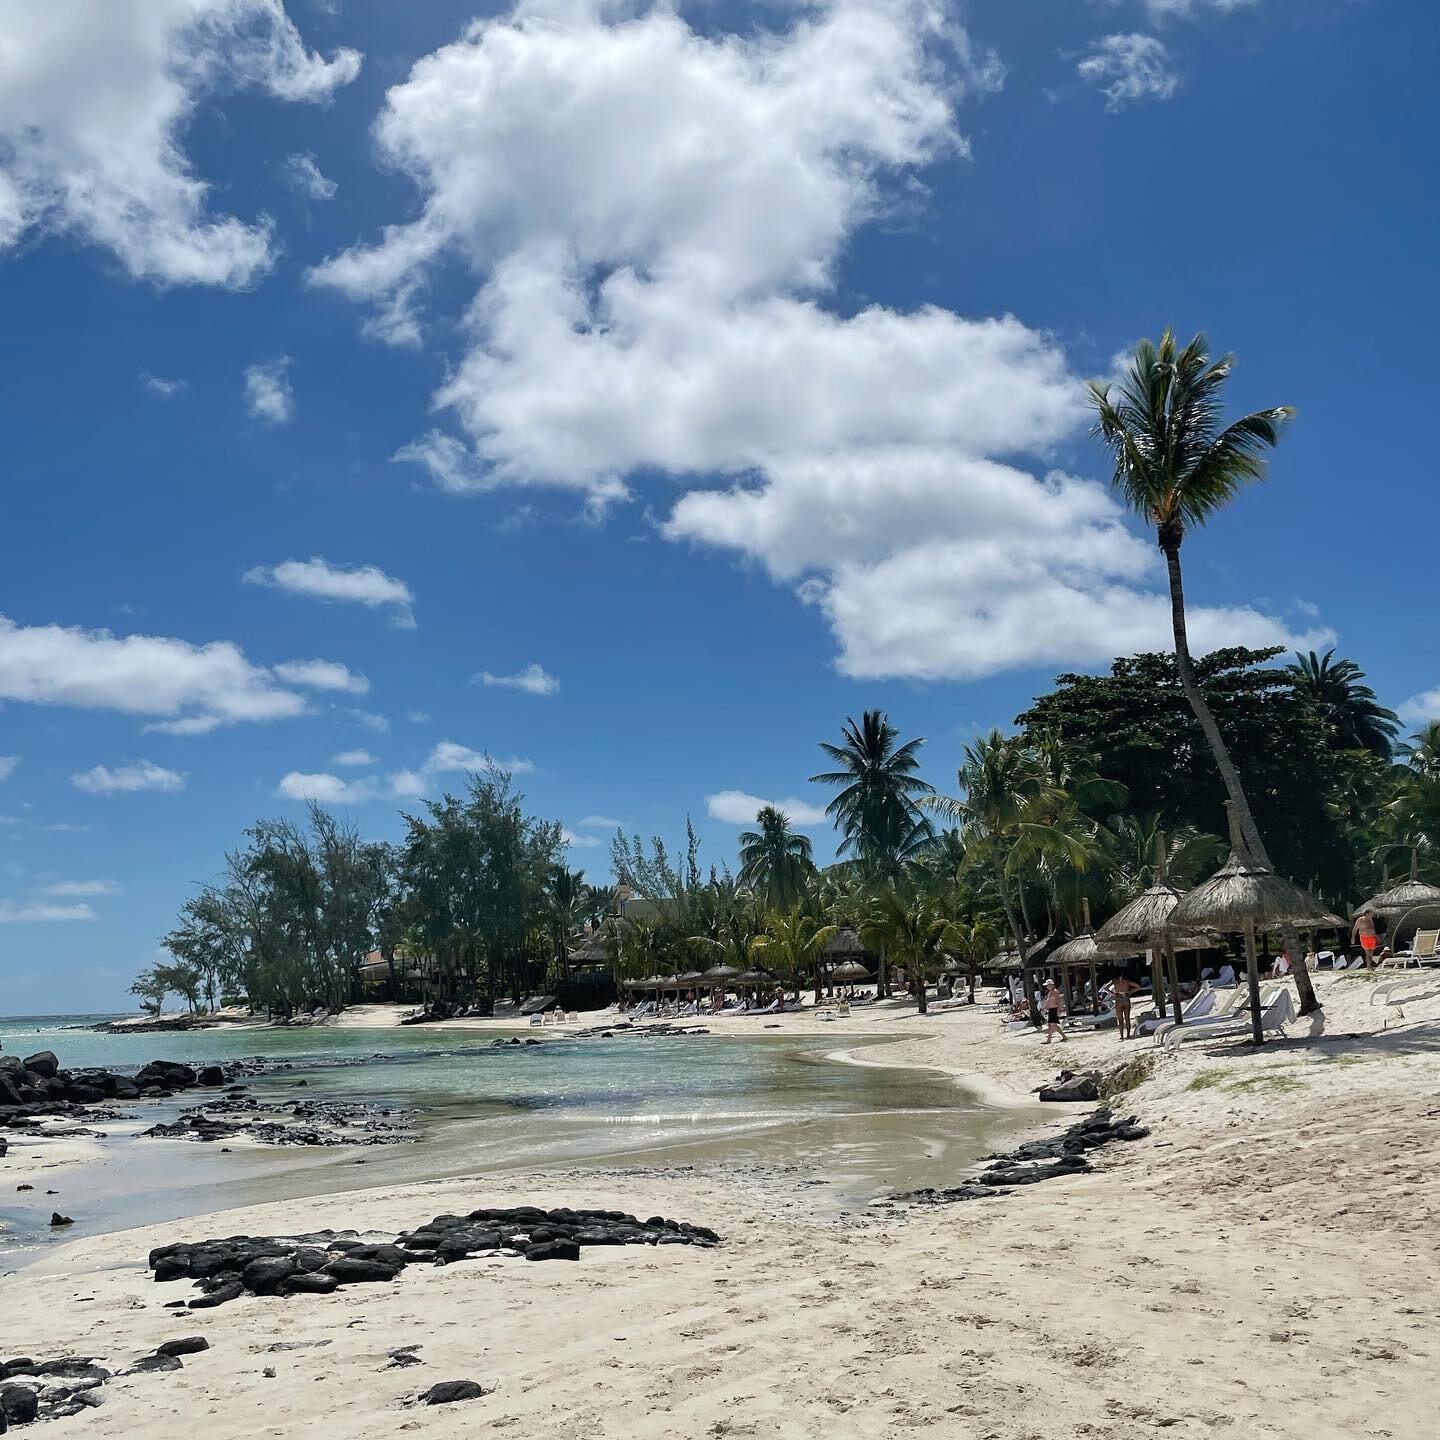 Summer vacation in the winter #mauritius #beach